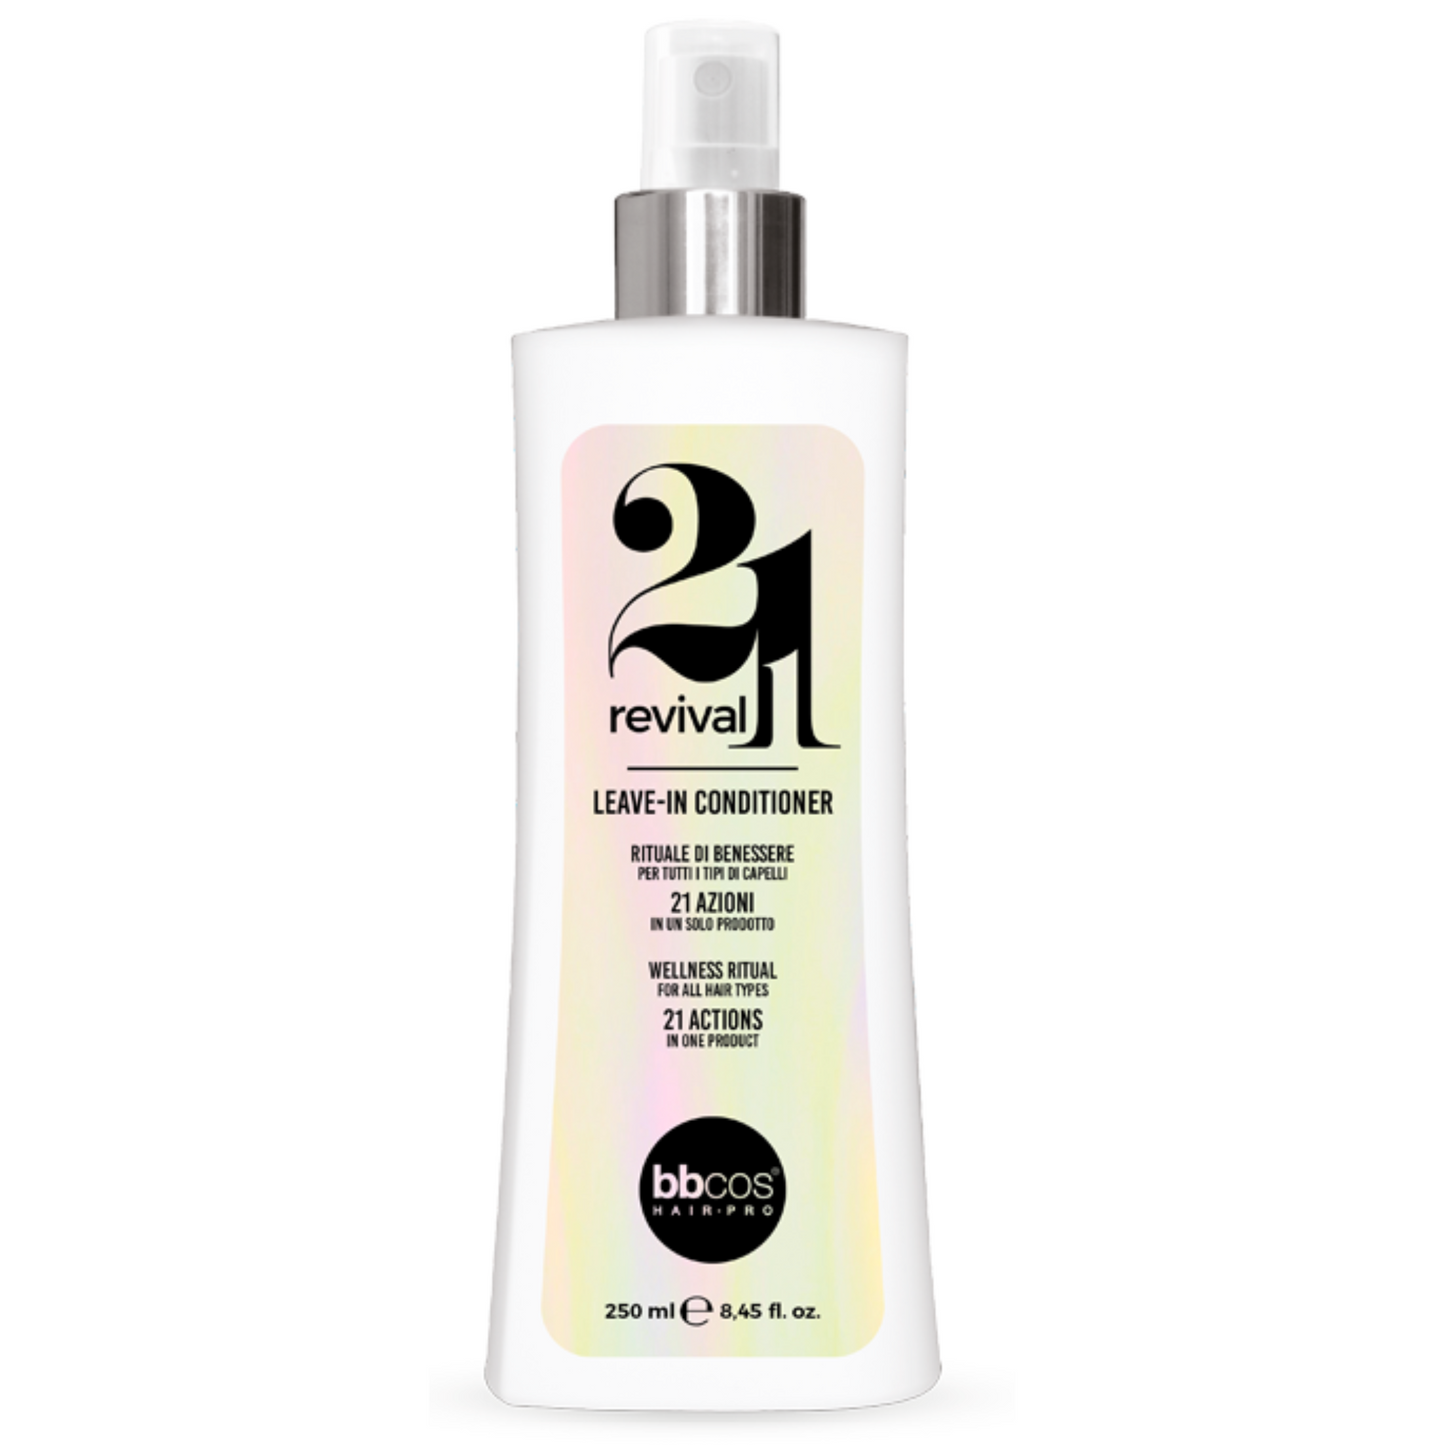 BBCOS Revival 21 in 1 Leave in Conditioner